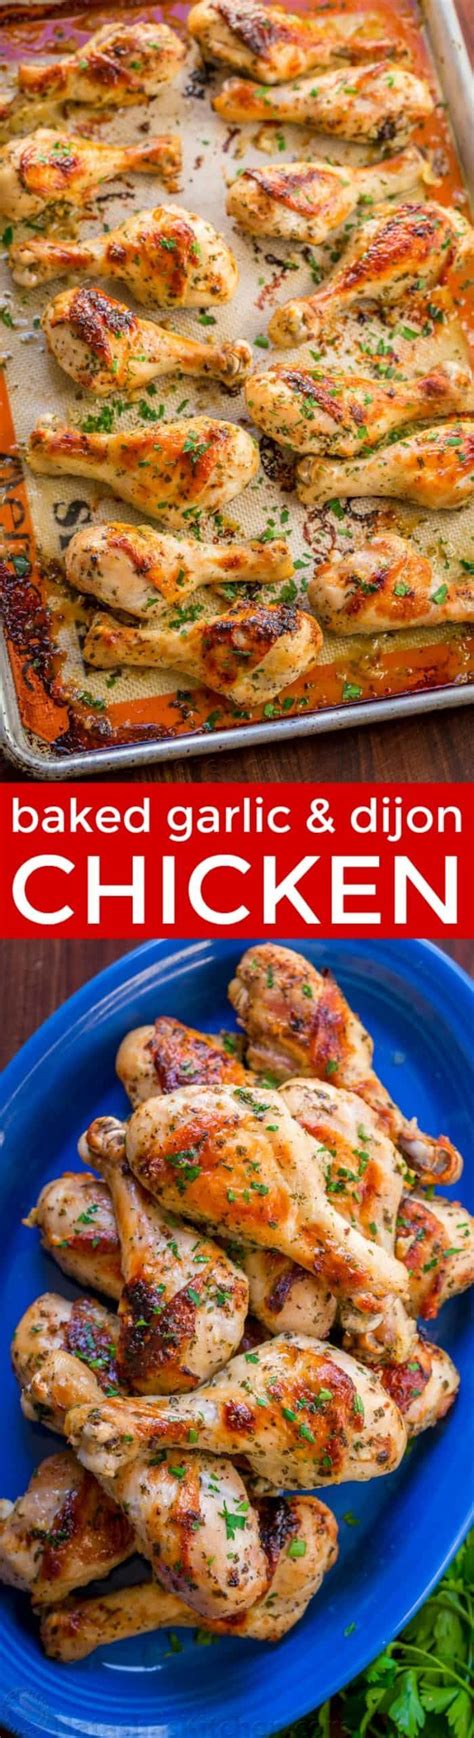 Baked Chicken Legs recipe with garlic, lemon and dijon. An easy and excellent chicken marinade ...